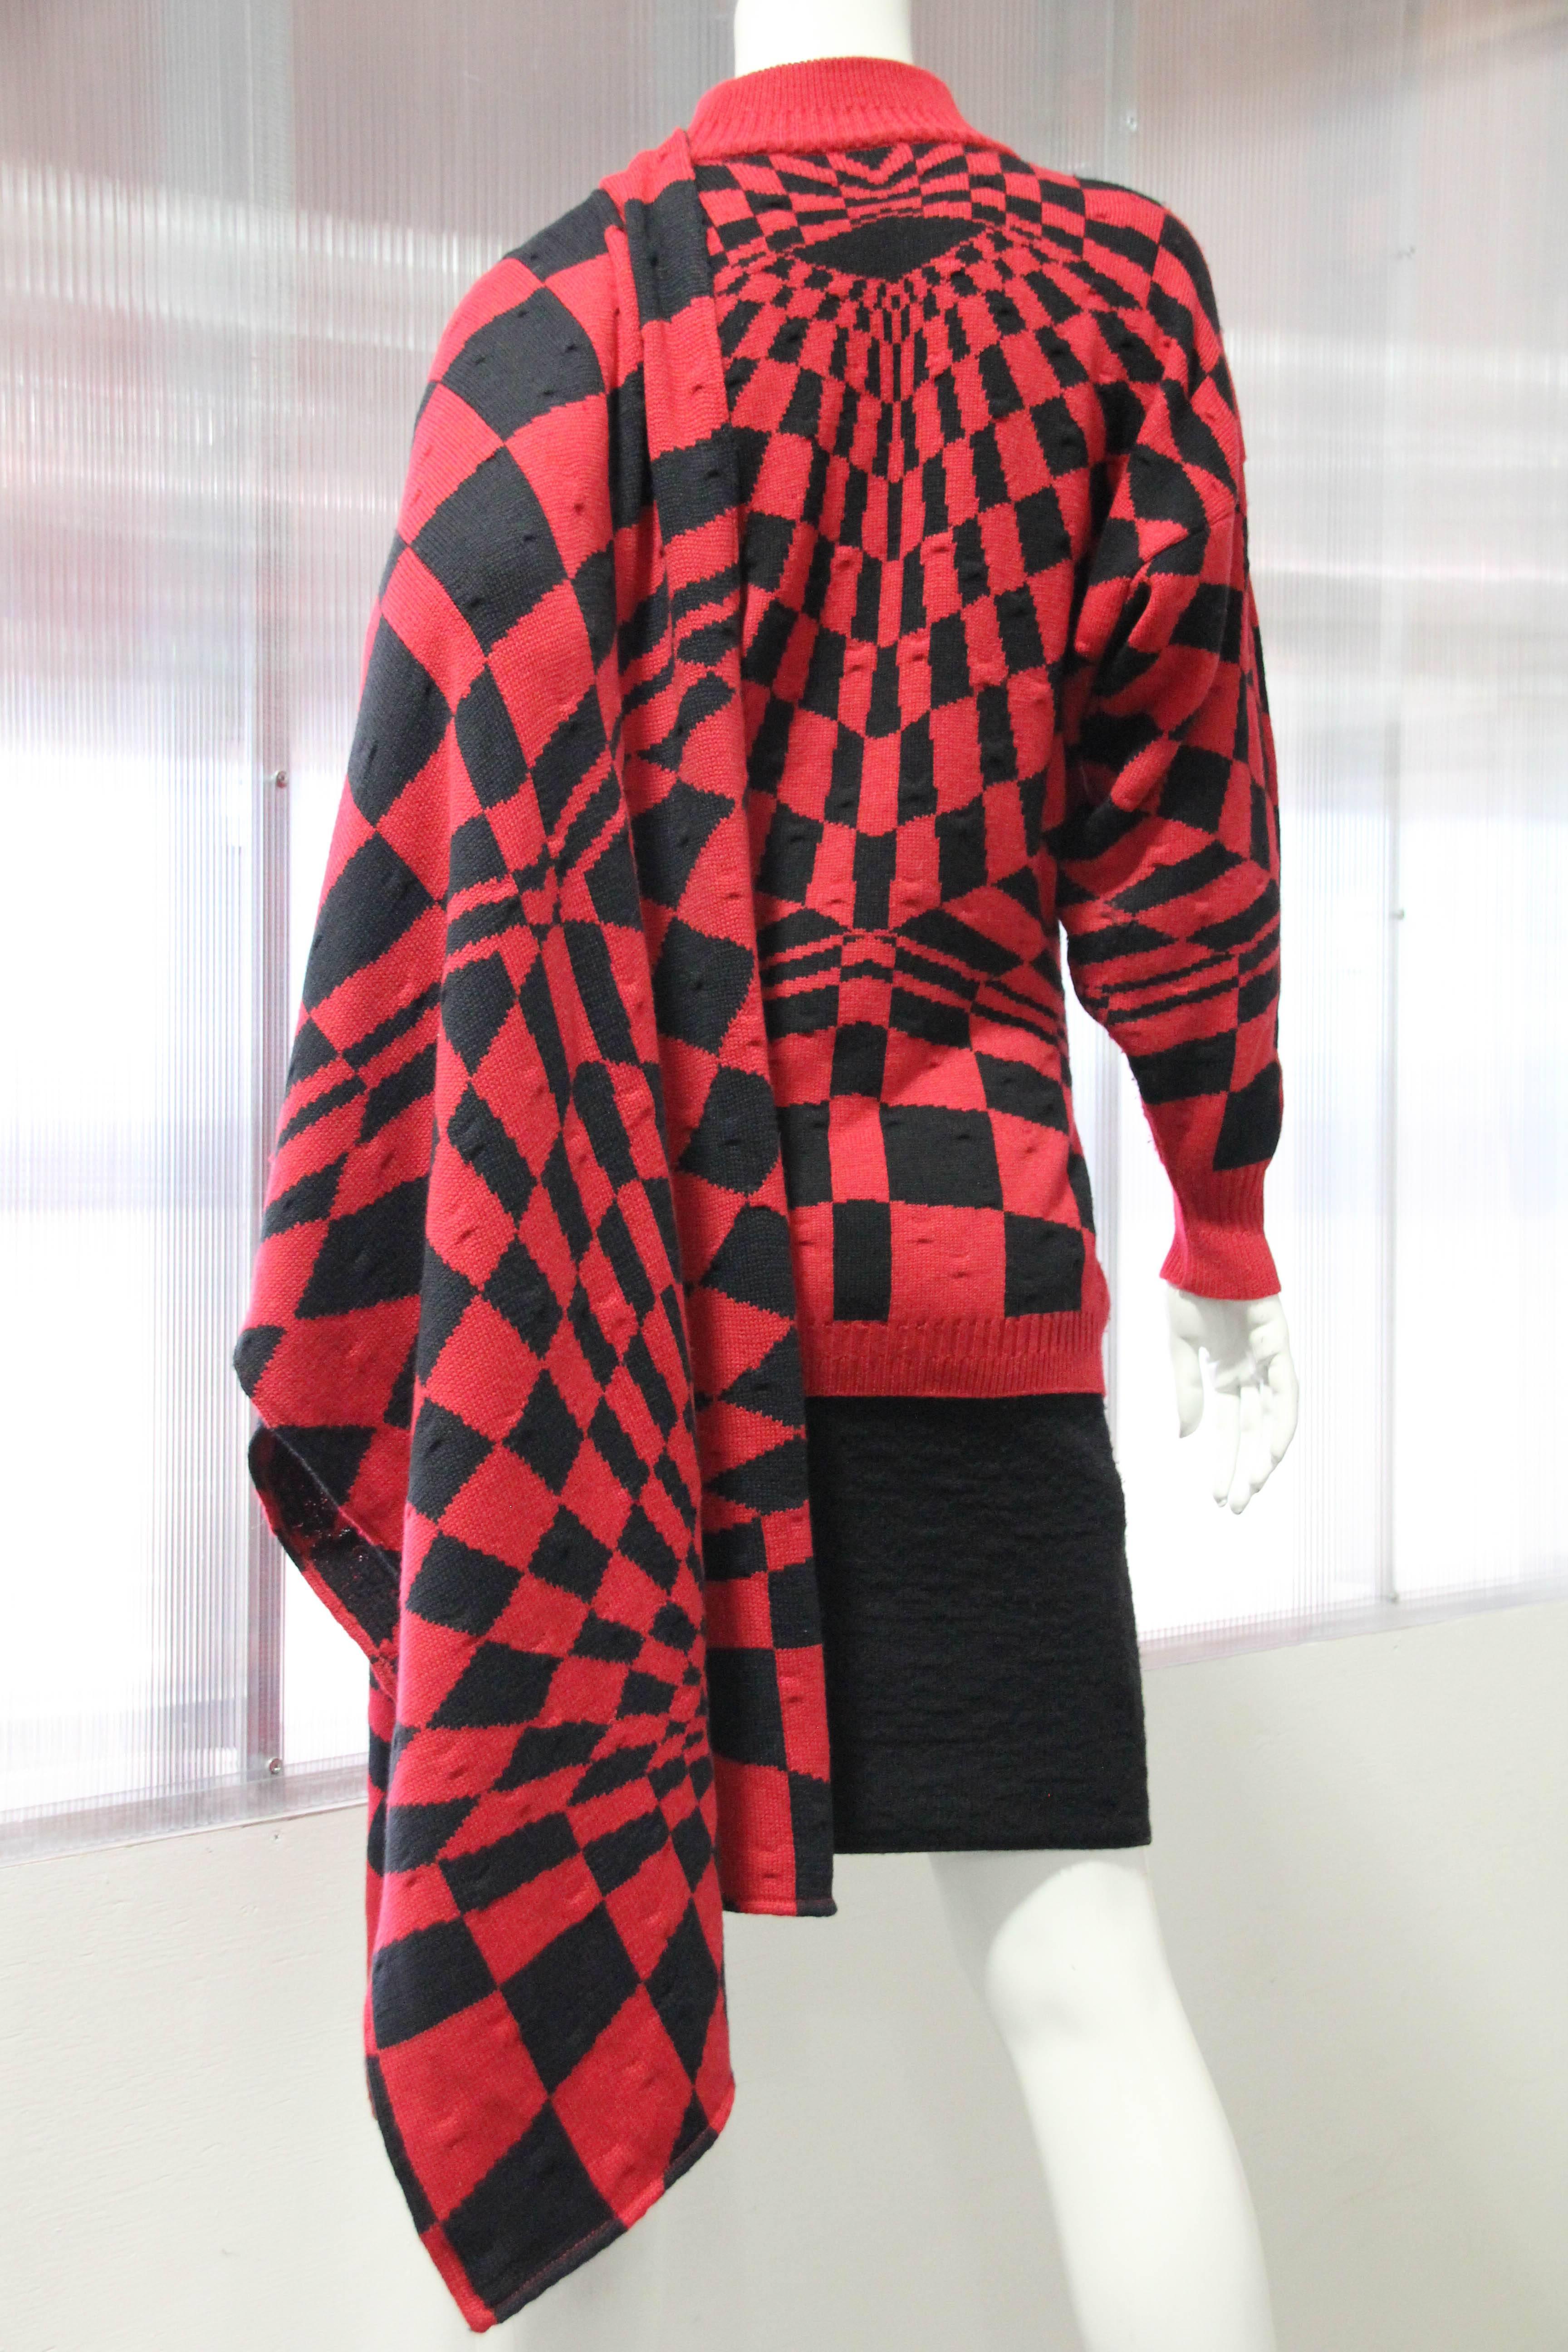 1980s Gianni Versace 3-Piece Knit Skirt Sweater & Scarf in Mod Red Checkerboard 1